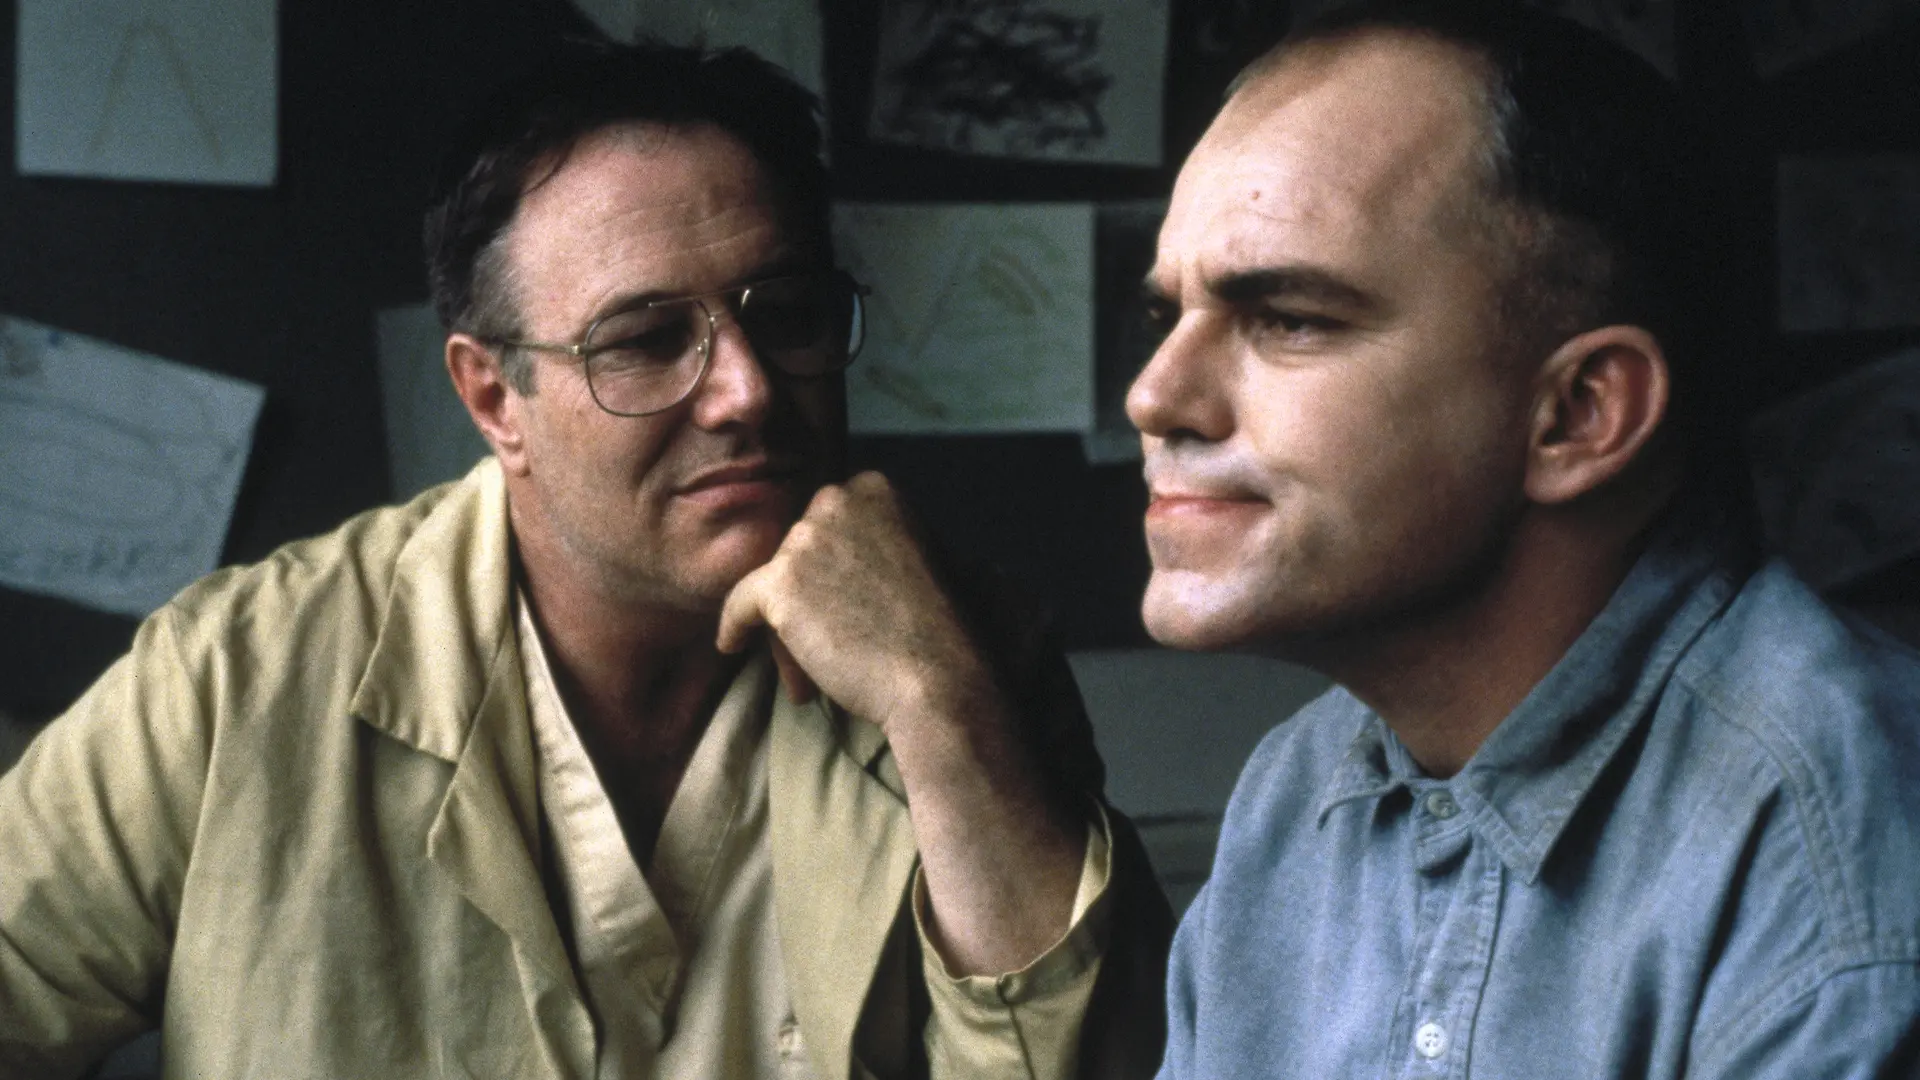 How To Watch Sling Blade For Free